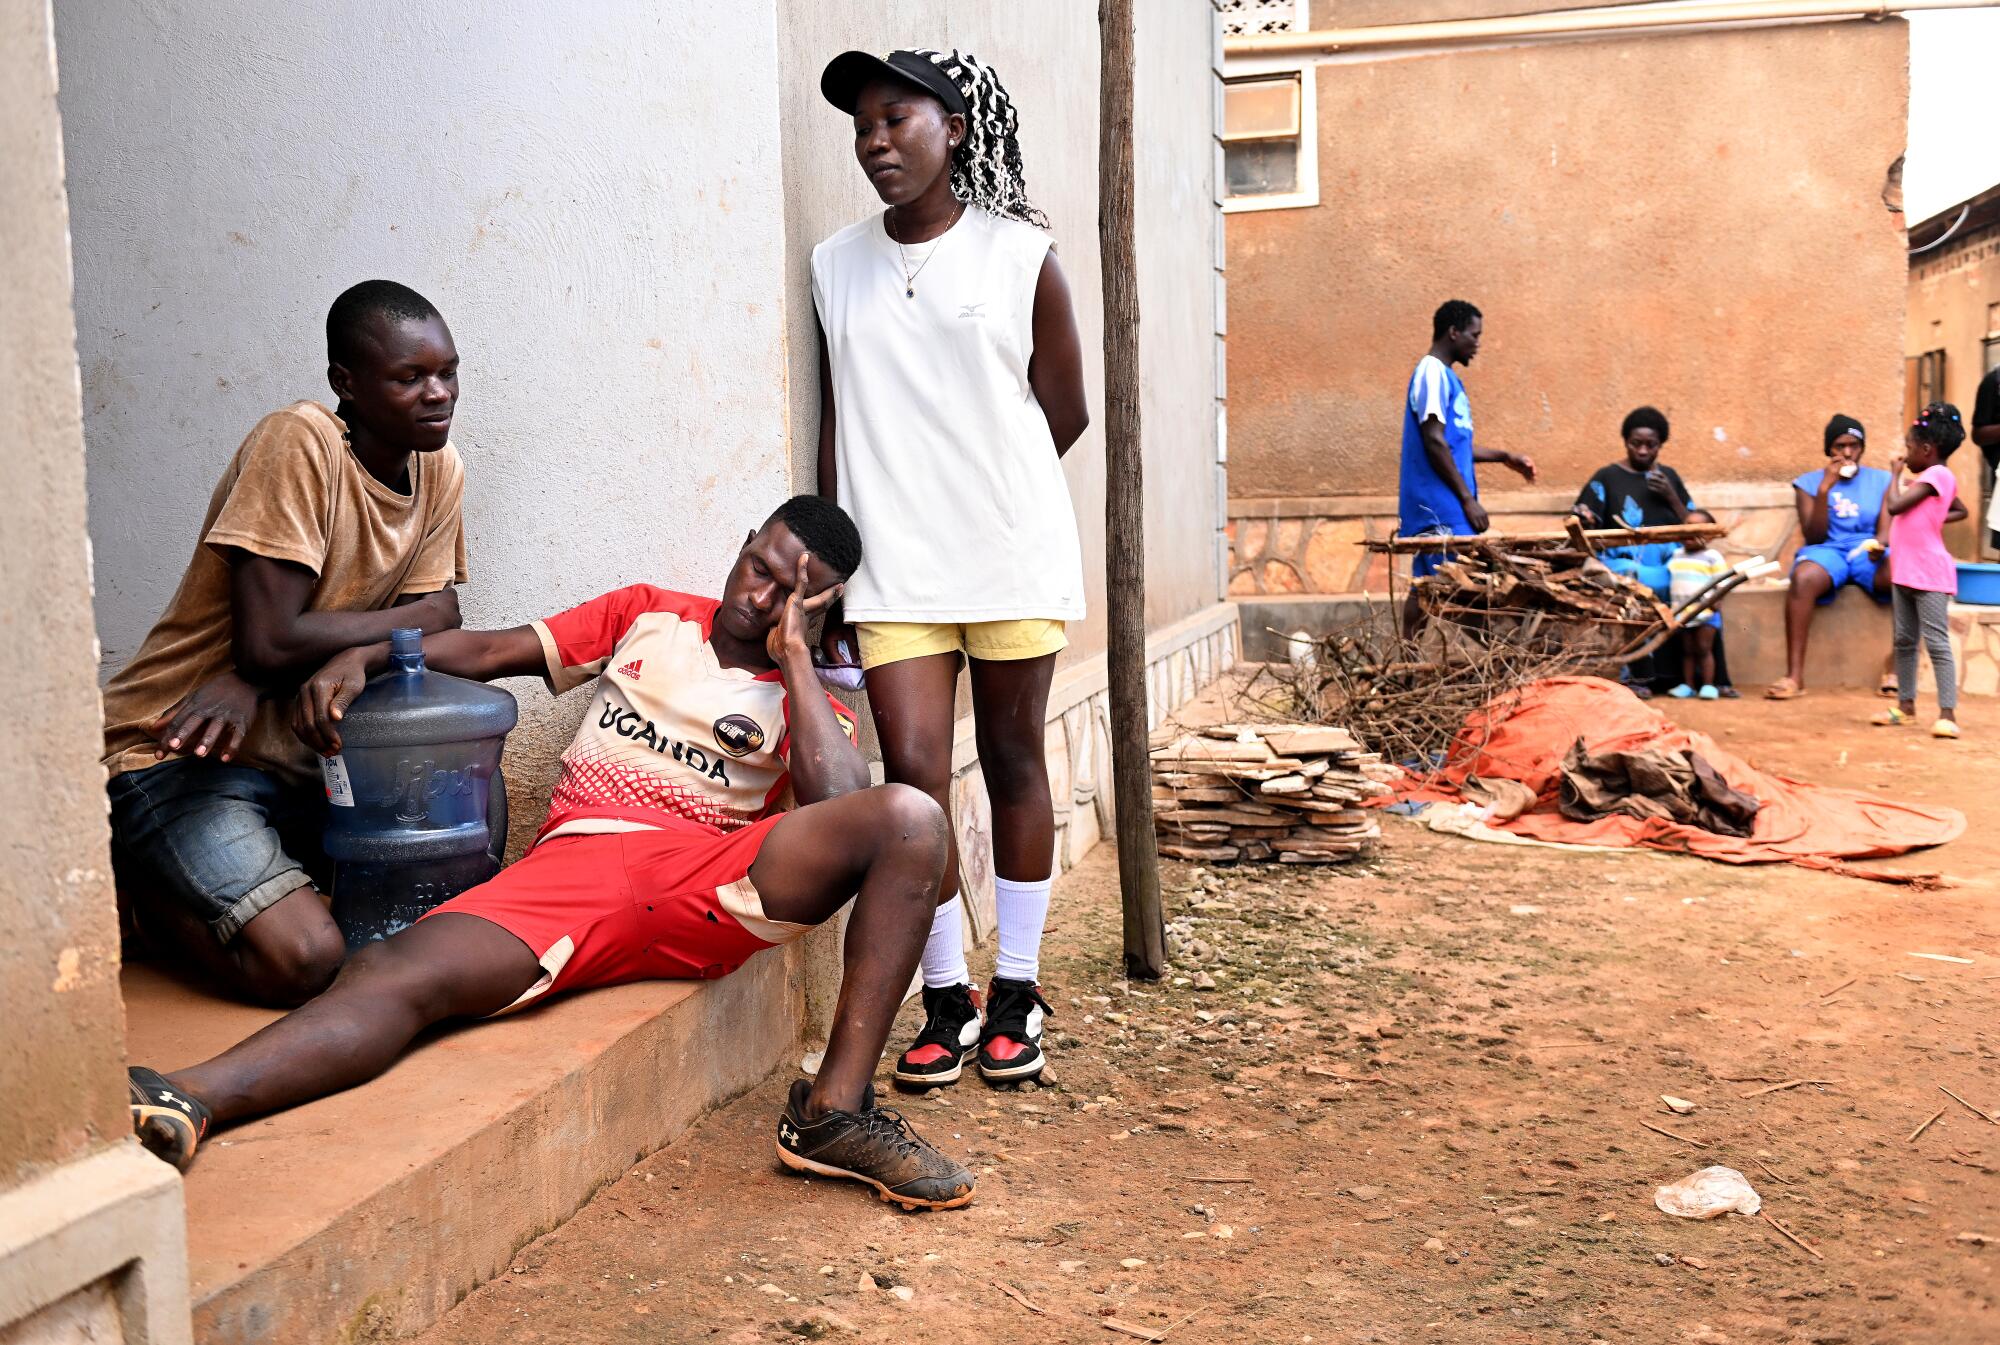 An exhausted Dennis Kasumba rests as he hangs out with friends and players after baseball practice.